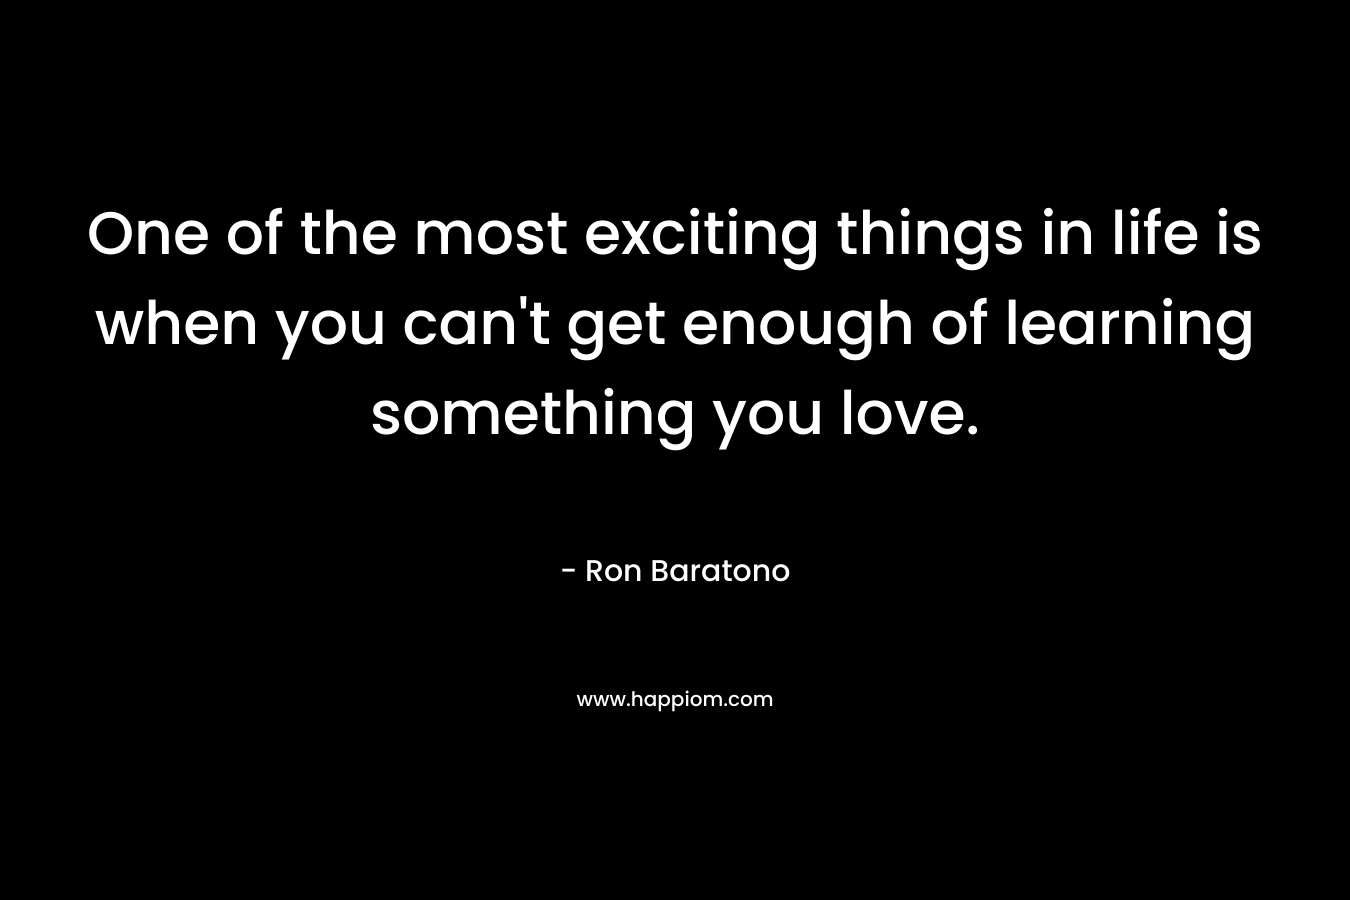 One of the most exciting things in life is when you can’t get enough of learning something you love. – Ron Baratono